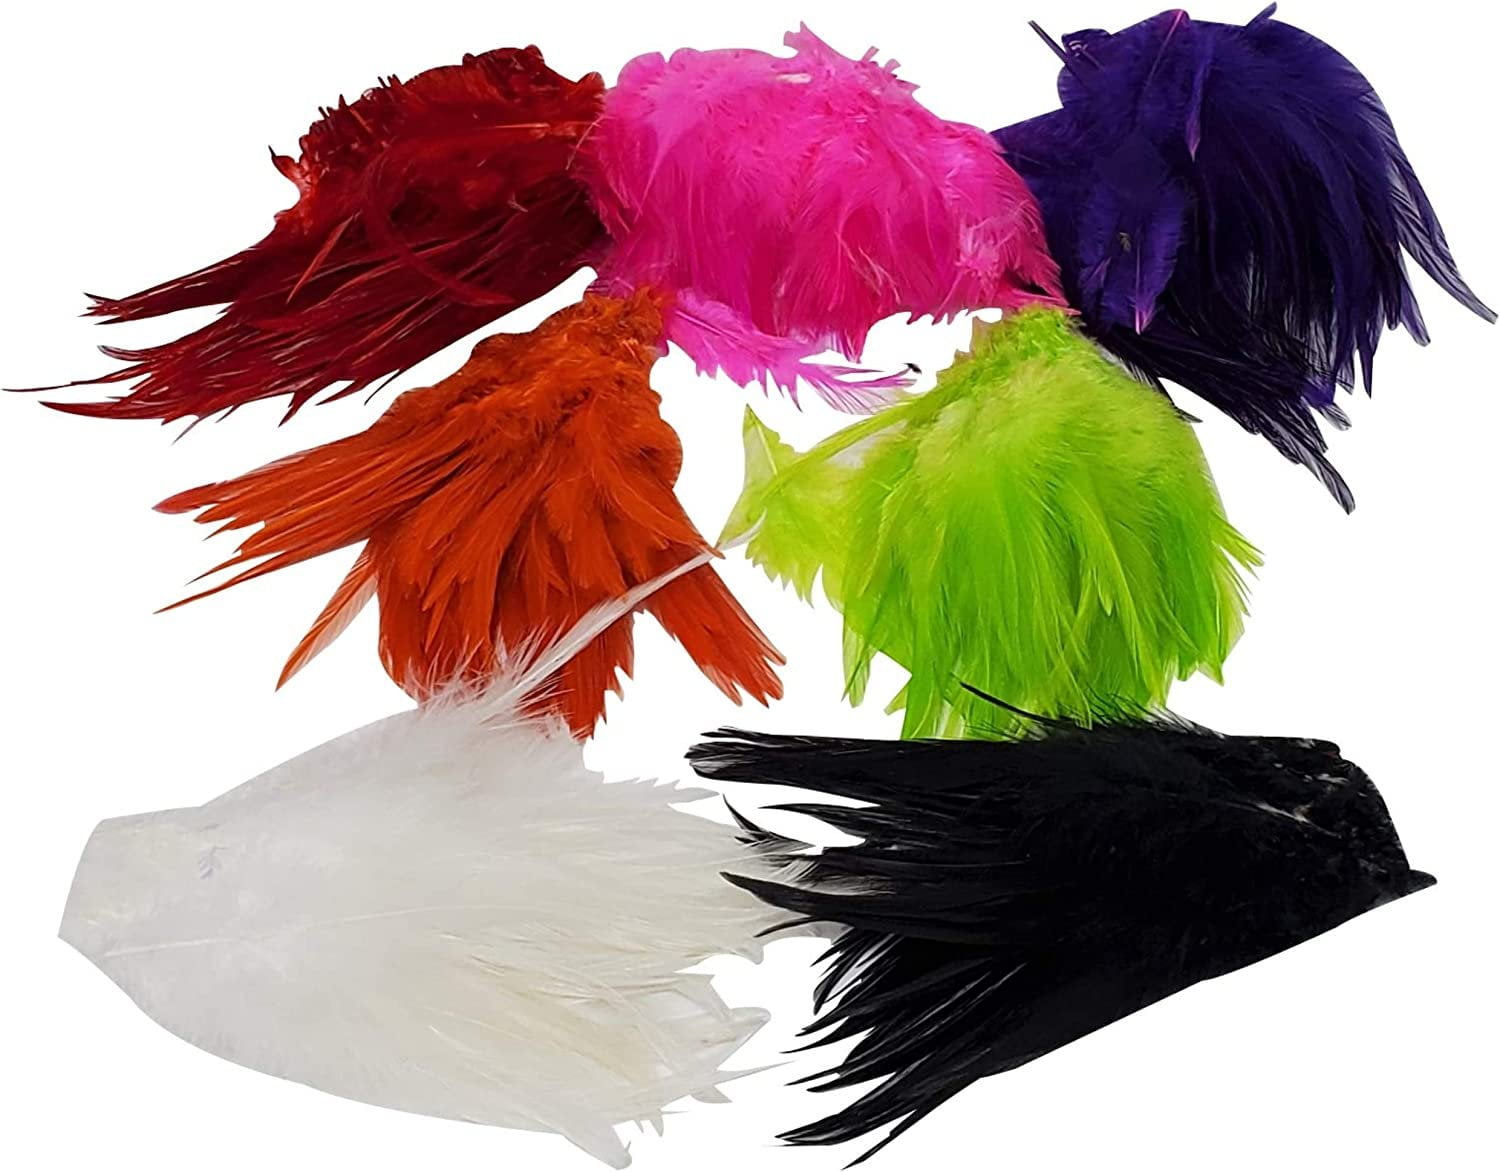 Creative Angler Saddle Hackle Fly Tying Materials - Natural Feathers for  Wet Flies, Rooster Feathers, Hair Feathers for Crafts, Fly Tying Kit -  Small